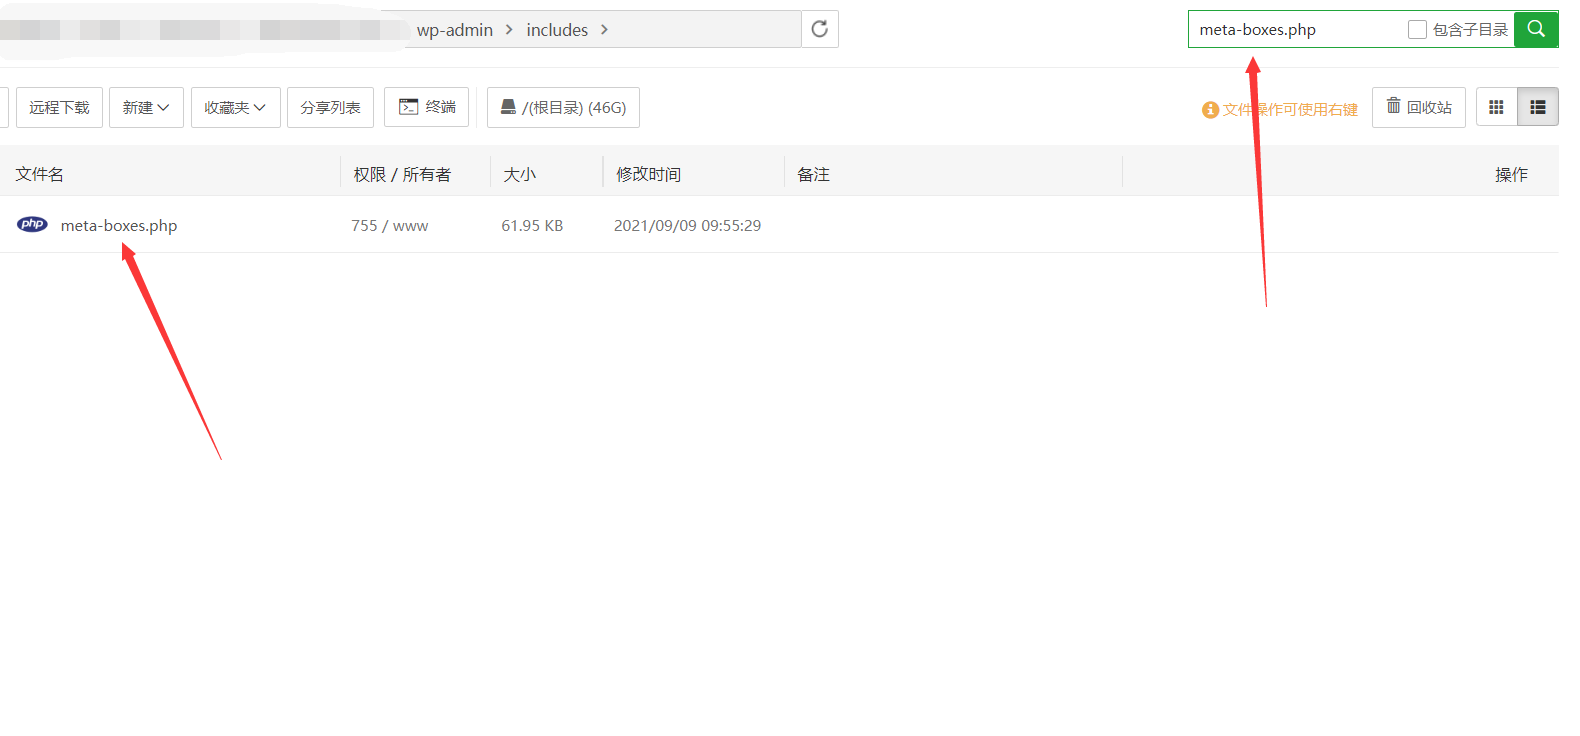 wordpress/wp-admin/includes 目录下的 meta-boxes.php文件